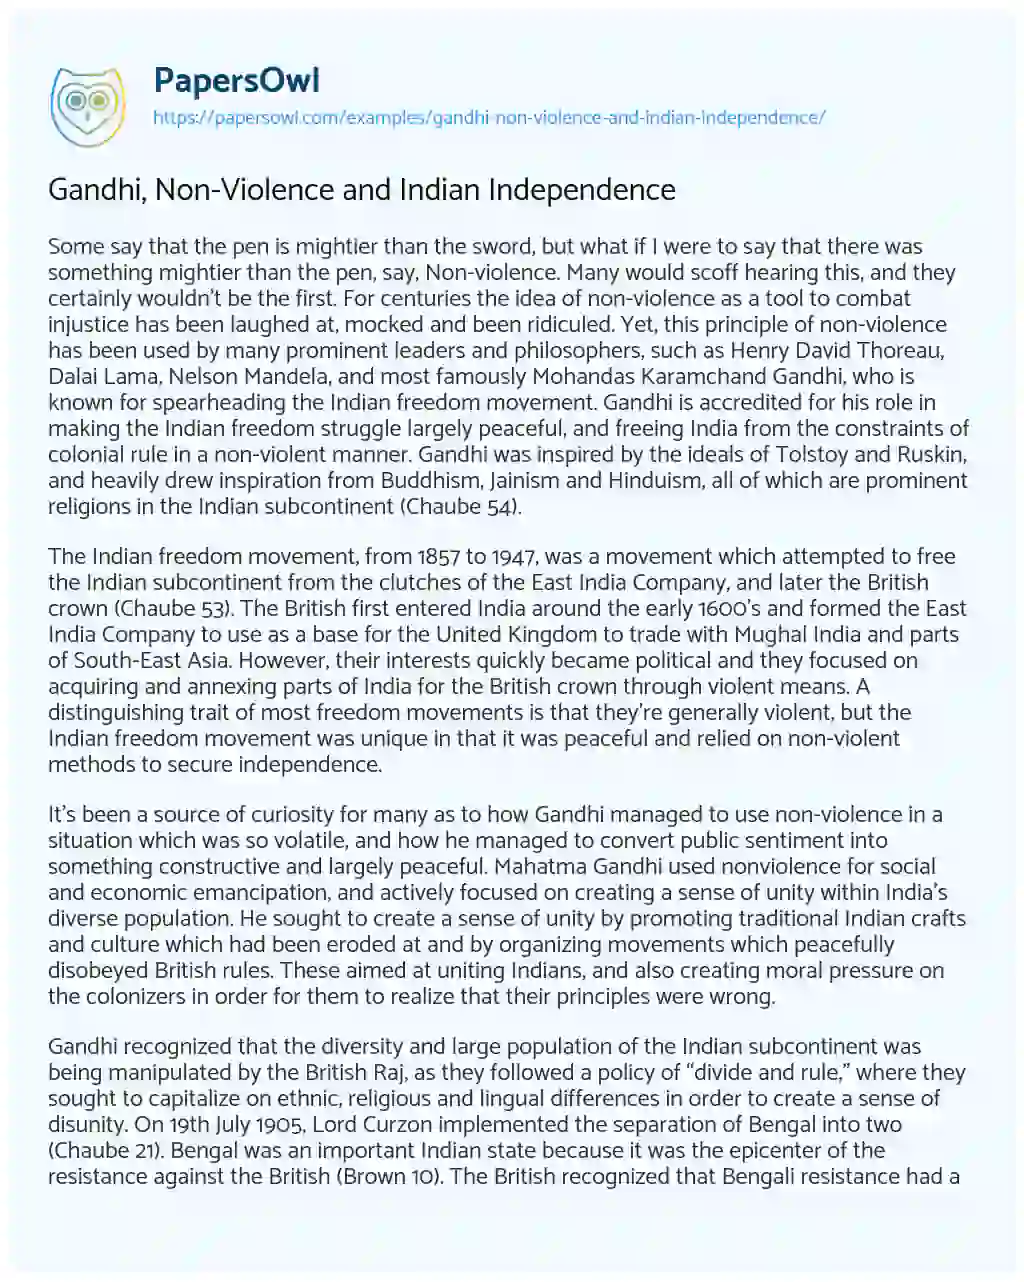 Essay on Gandhi, Non-Violence and Indian Independence